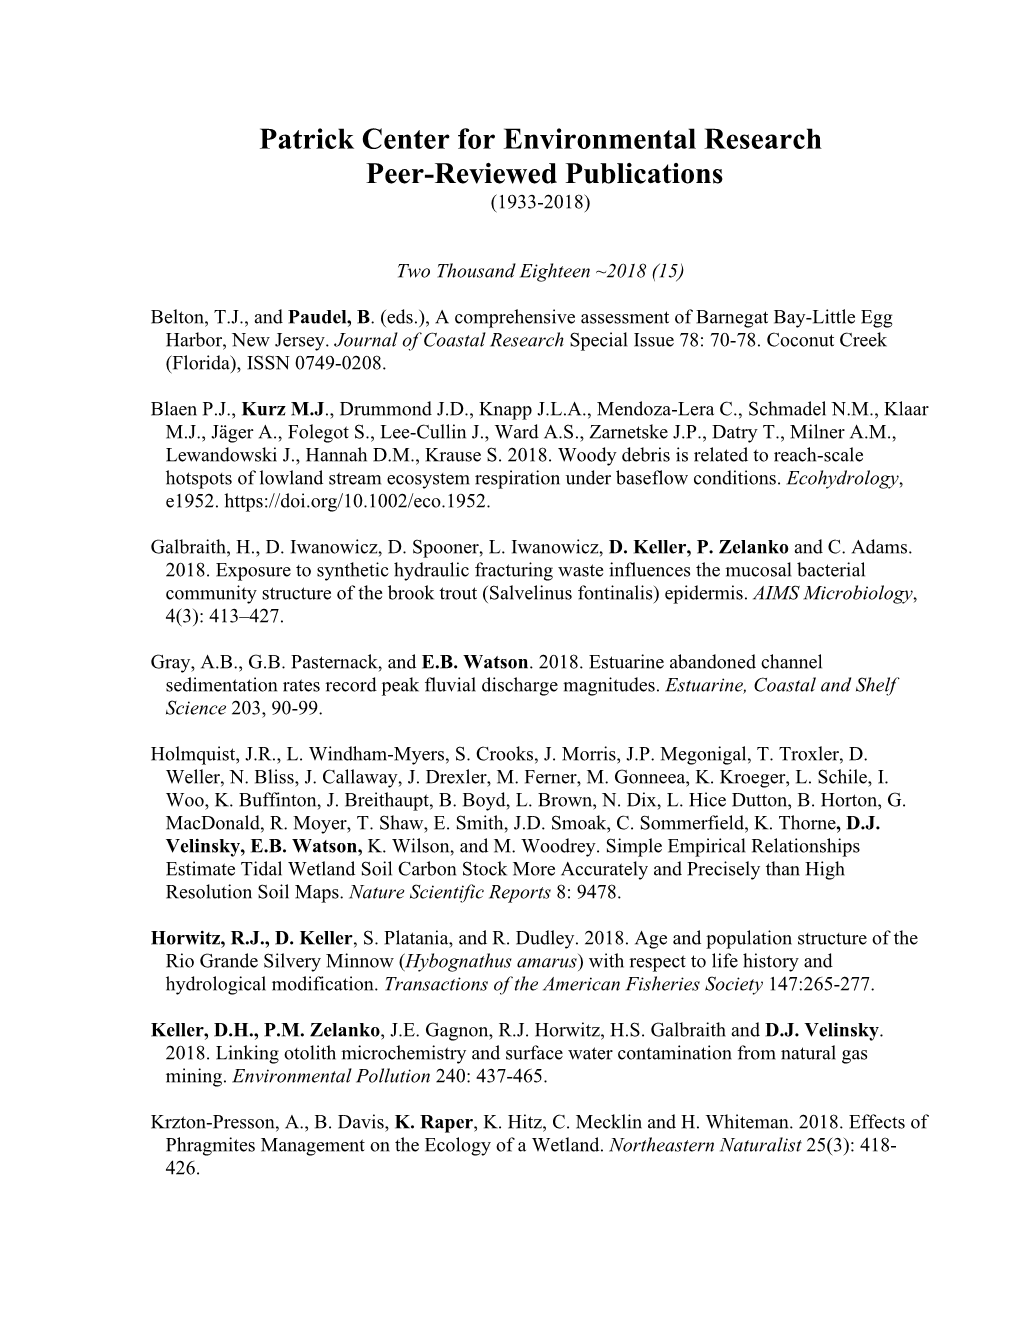 Patrick Center for Environmental Research Peer-Reviewed Publications (1933-2018)